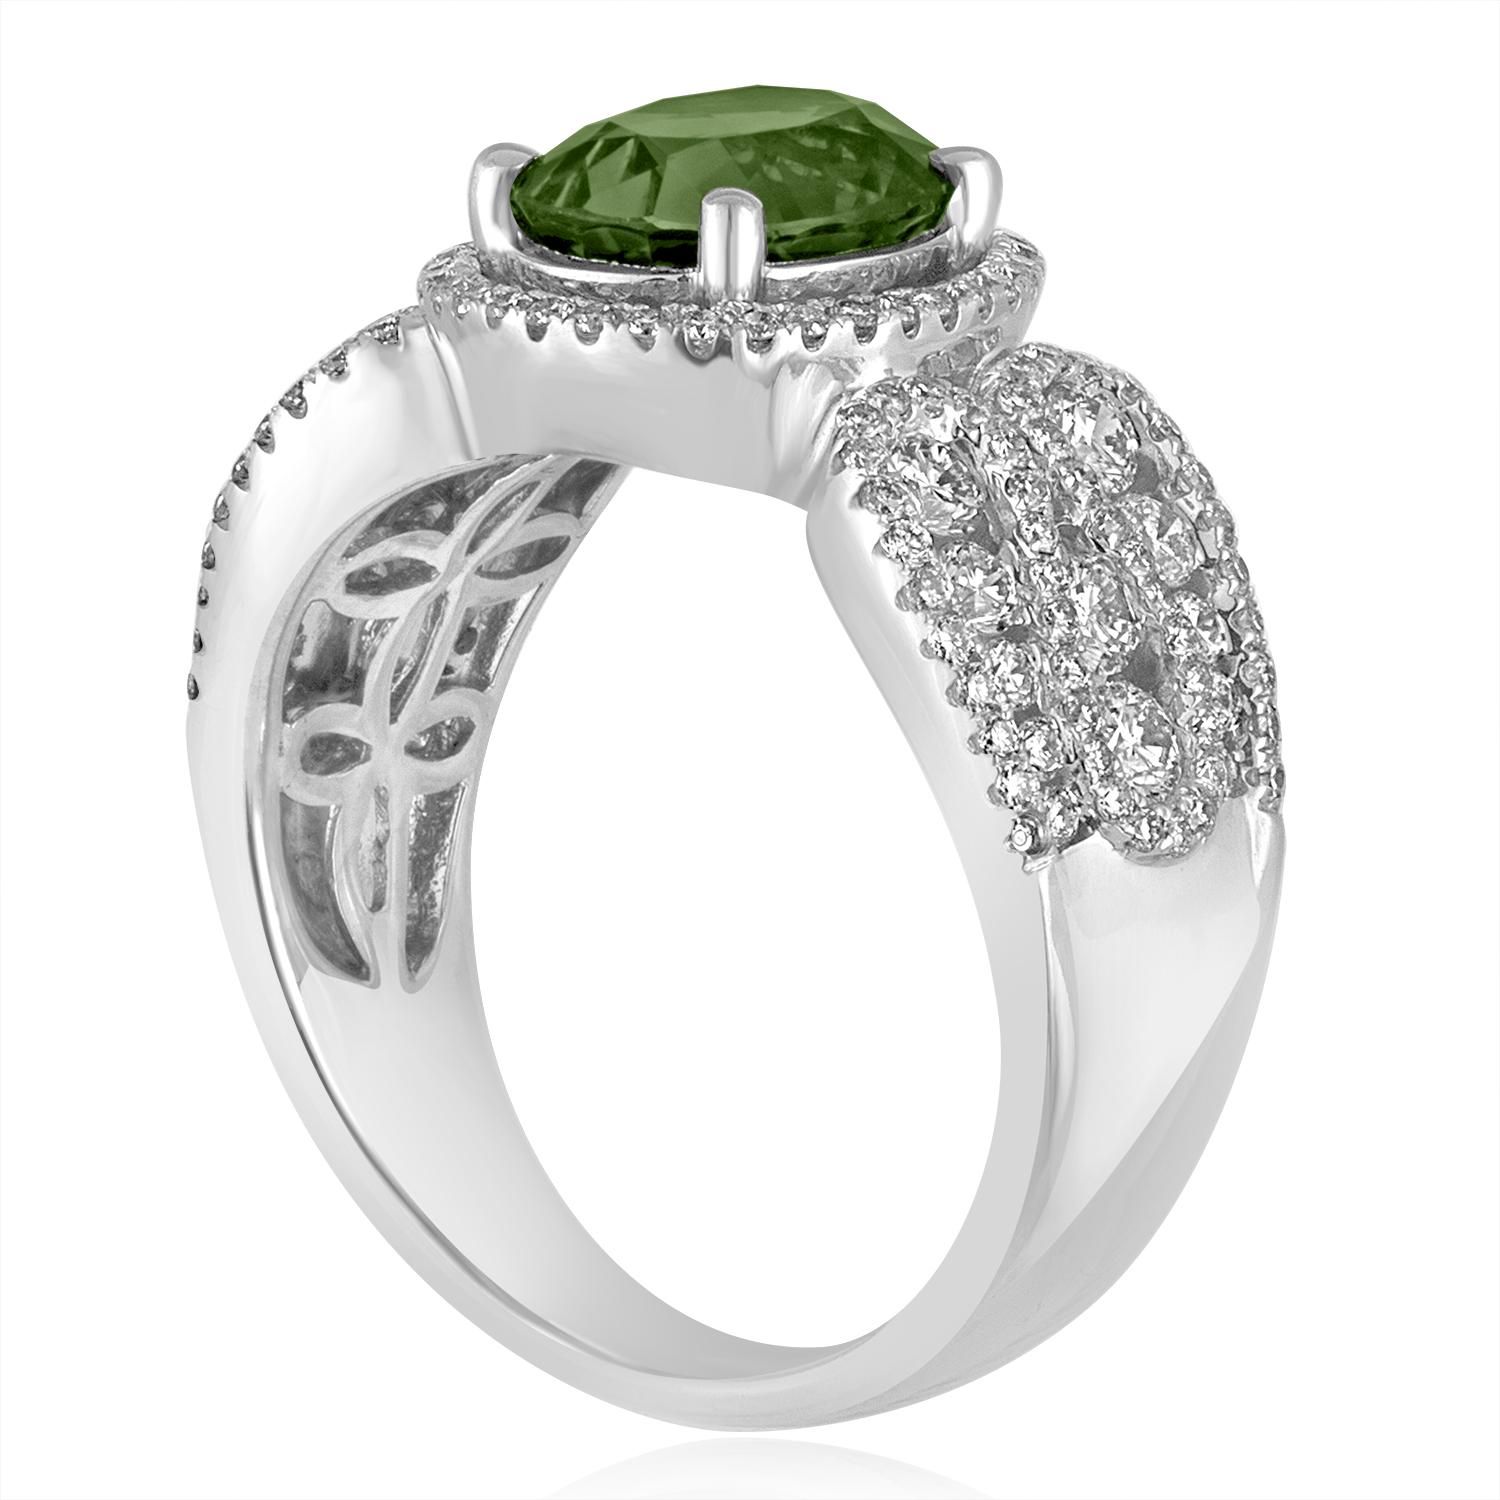 Stunningly Beautiful Green Sapphire Ring
The ring is 18K White Gold
There are 1.04 Carats in White Diamonds F/G VS/SI
The center stone is a Oval Green Sapphire 3.08 Carats
The stone is Certified by LAPIS, HEATED.
The ring is a size 7, sizable.
The